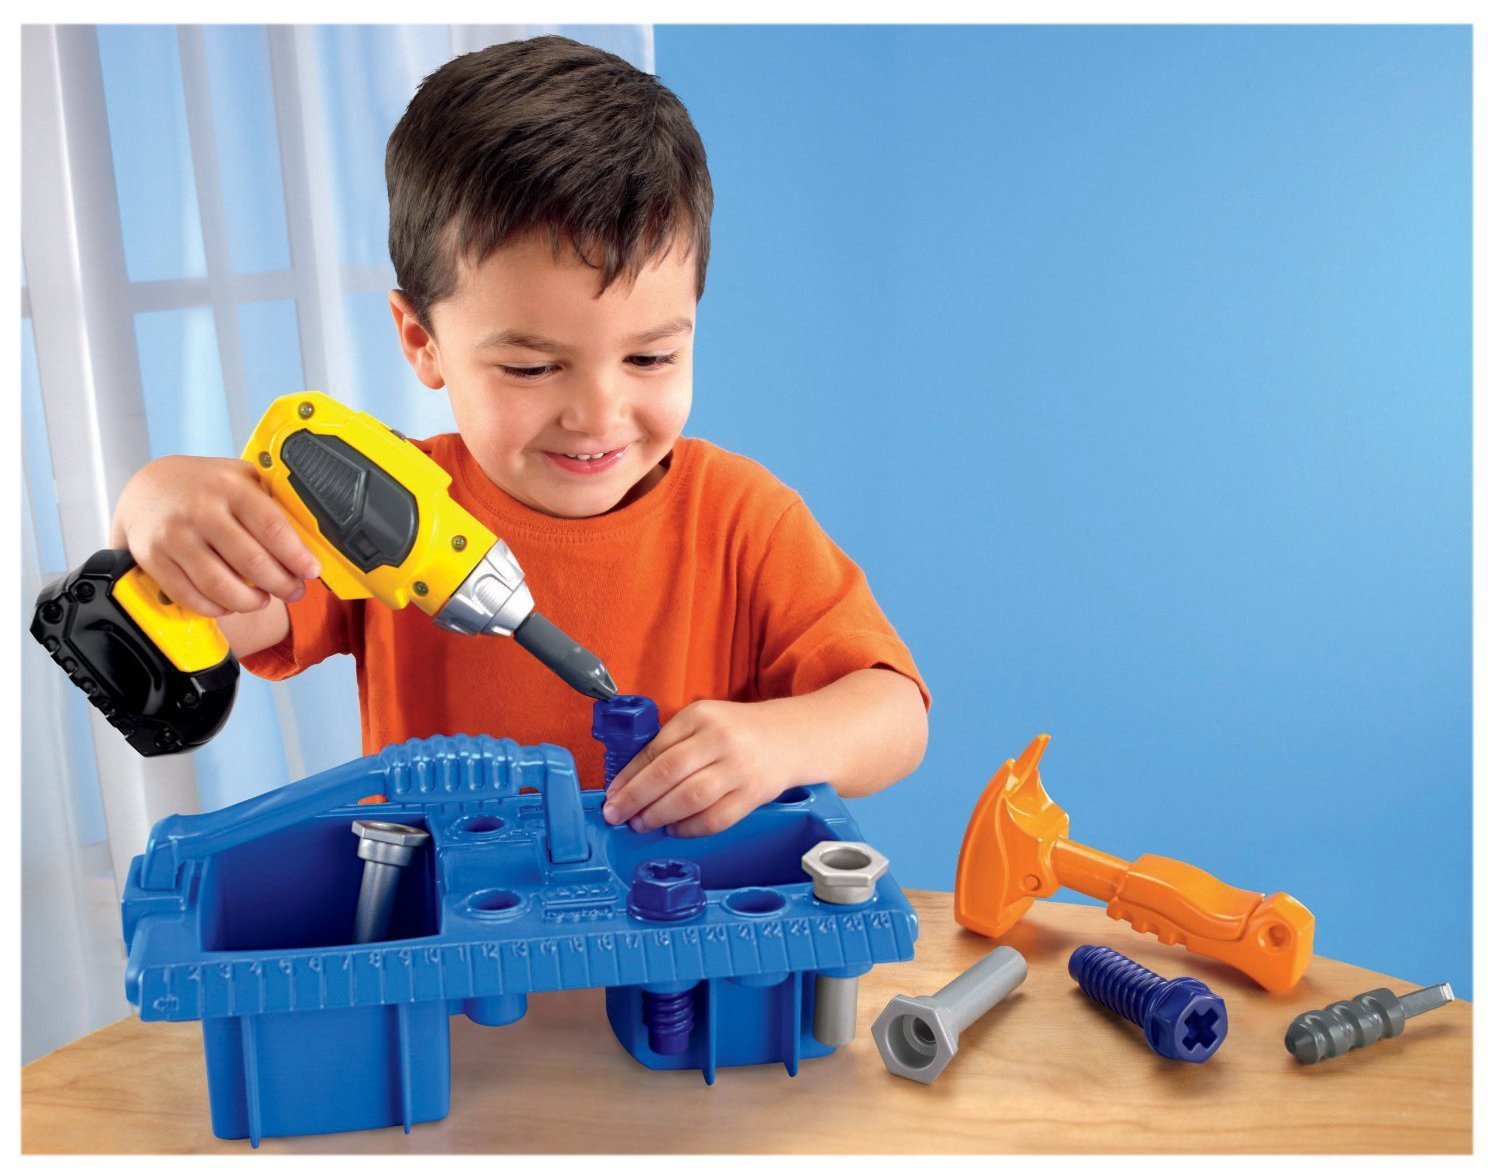 Fisher-Price Drillin’ Action Tool Set – Just $13.39!